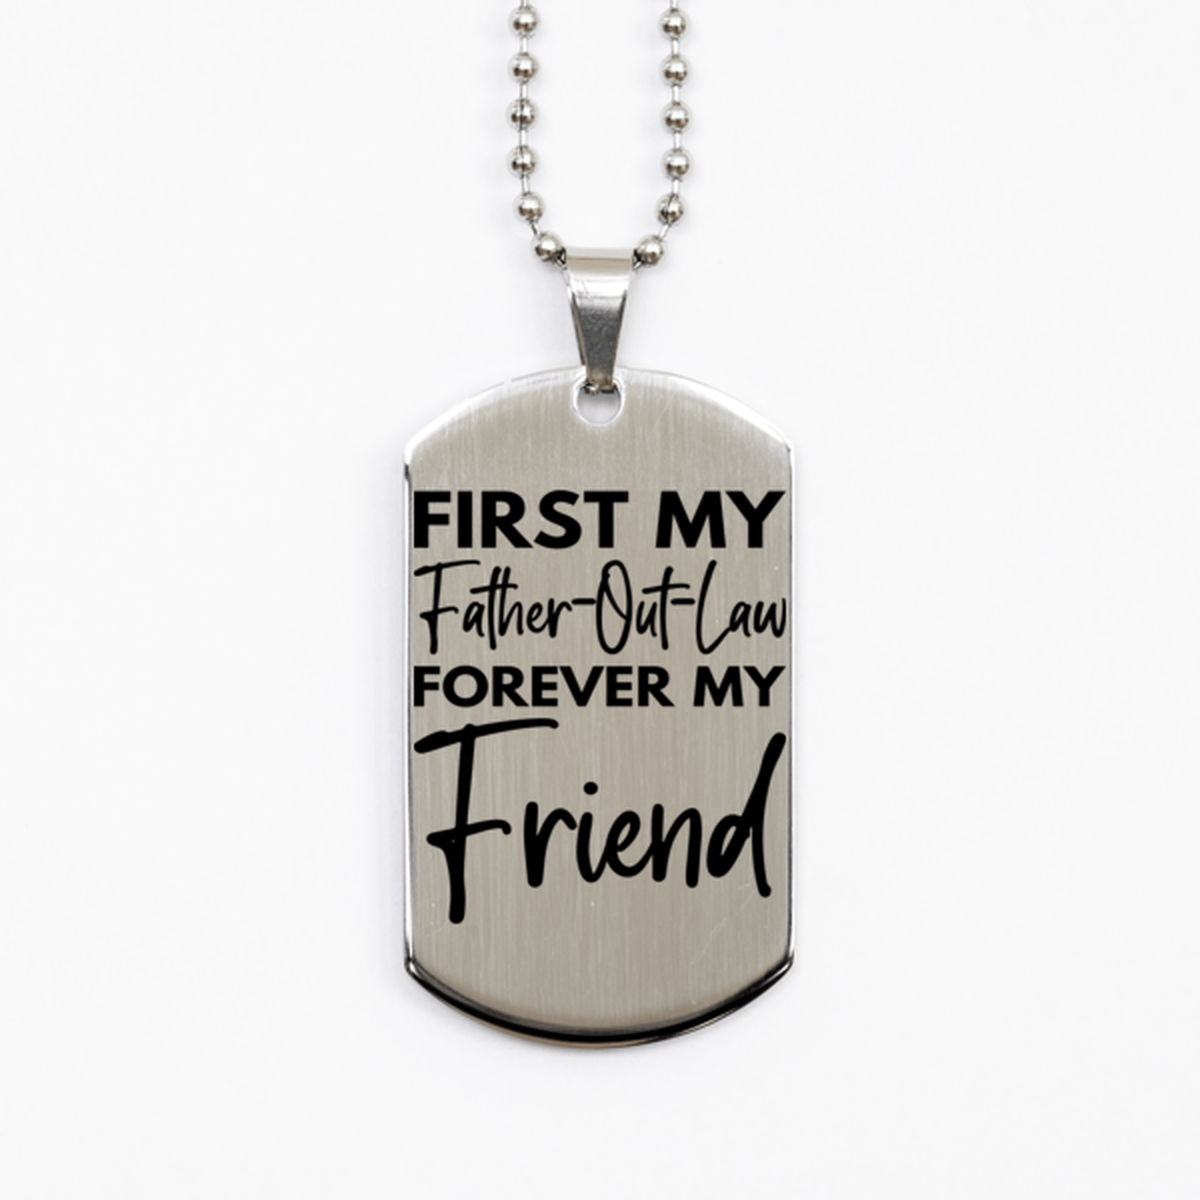 Inspirational Father-Out-Law Silver Dog Tag Necklace, First My Father-Out-Law Forever My Friend, Best Birthday Gifts for Father-Out-Law